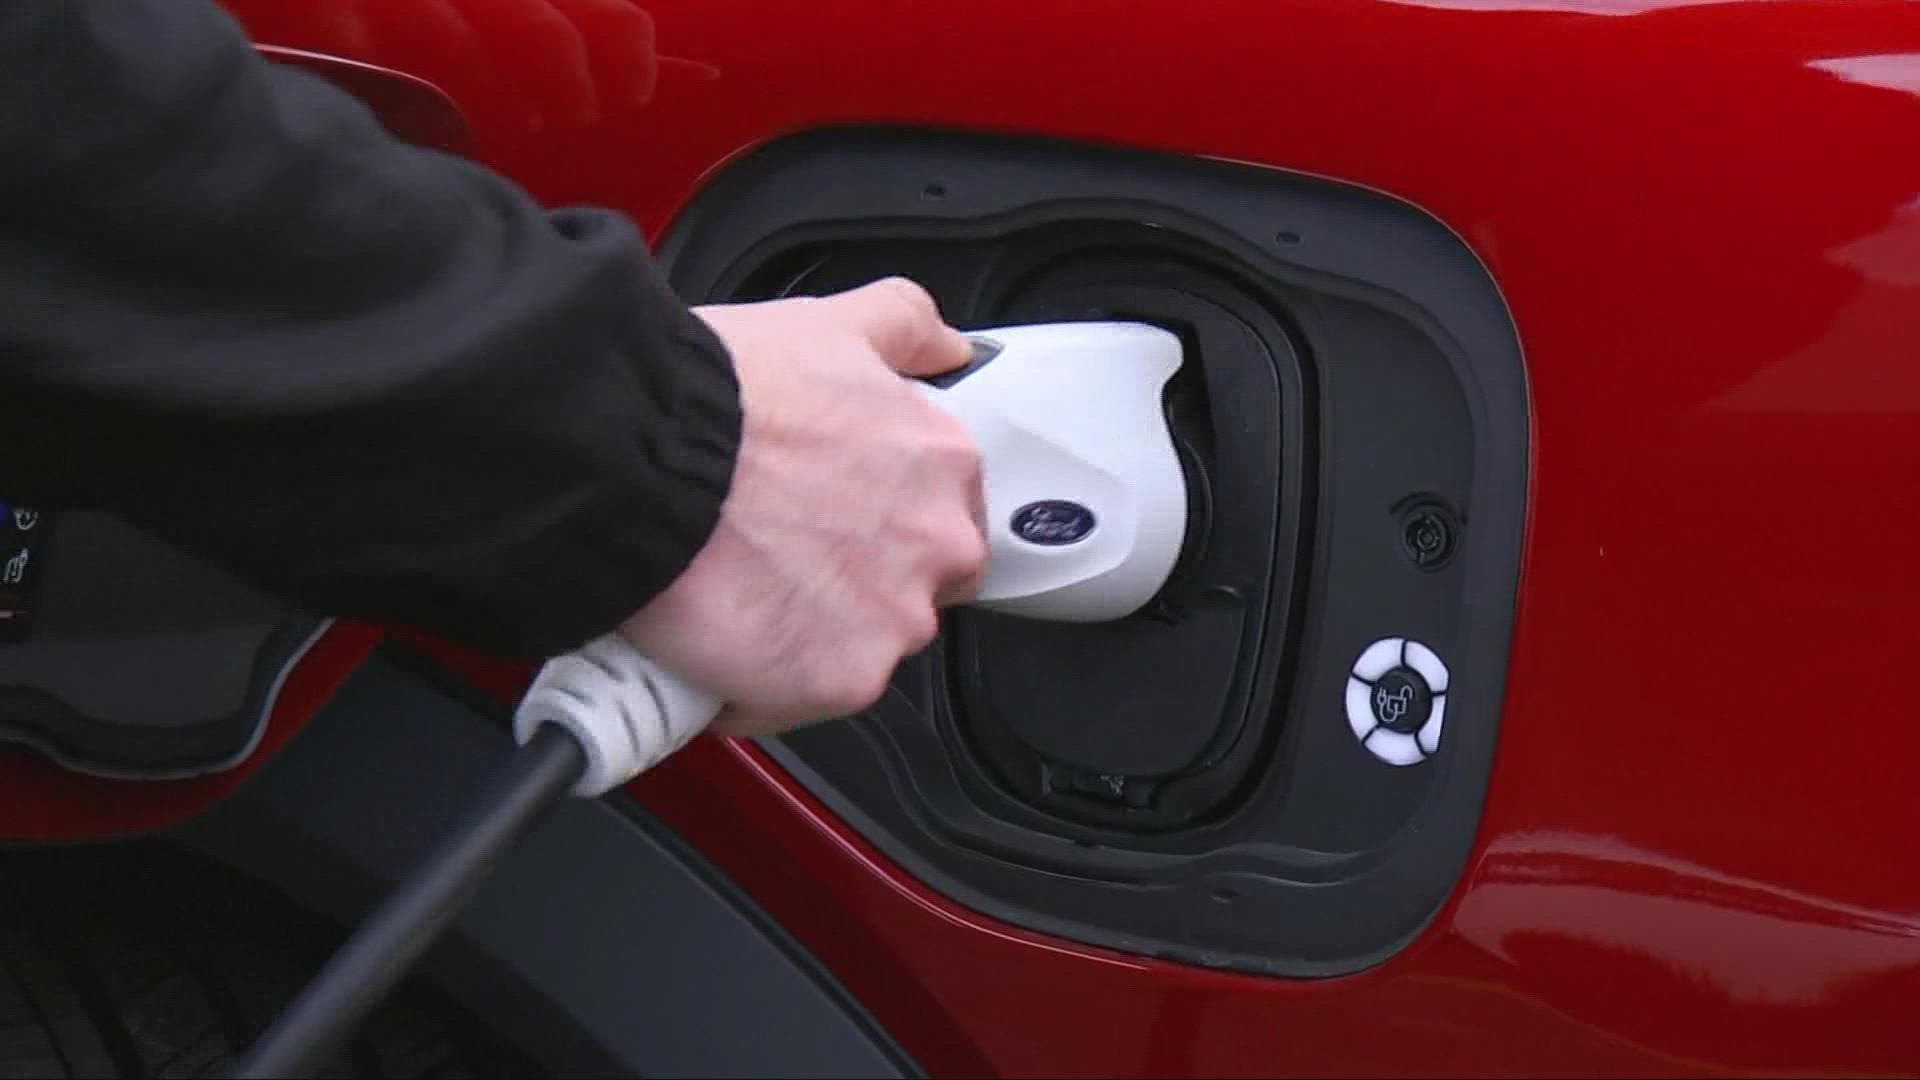 With gas prices constantly fluctuating and rising at the least opportune times, many Americans are becoming increasingly interested in electric vehicles.